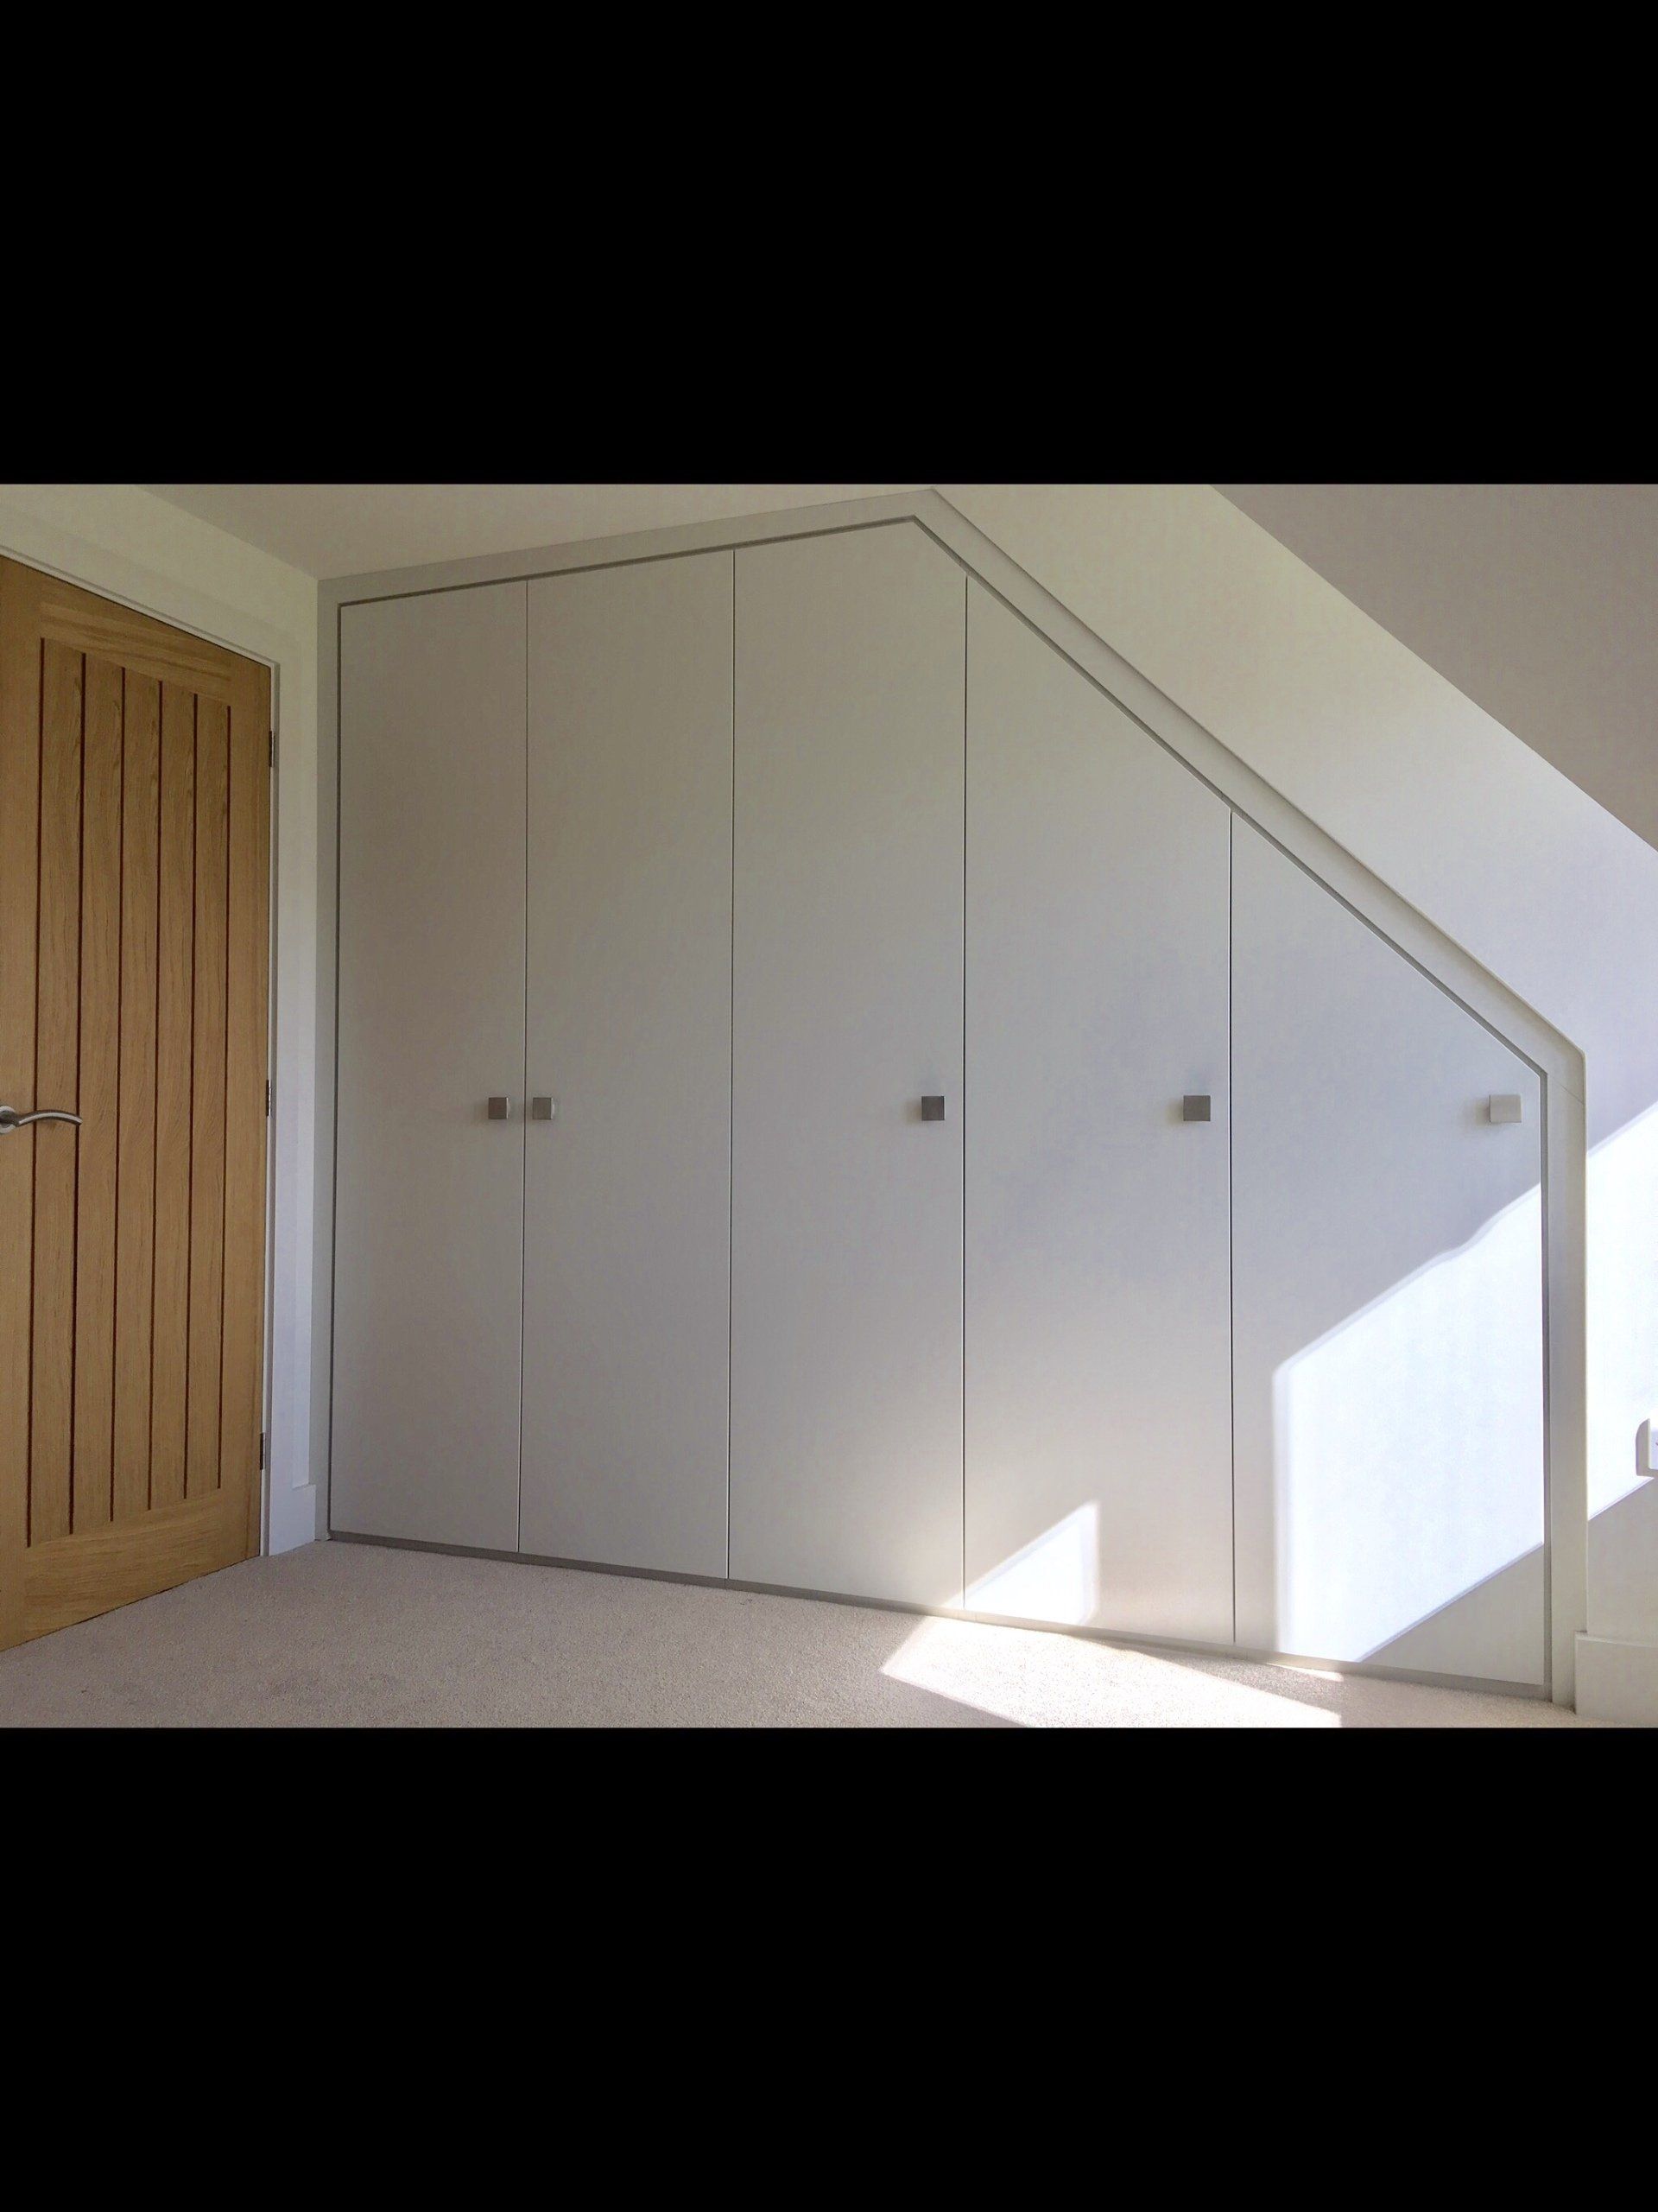 Wardrobe Fit and Installation. Crawley down. West Sussex. Builder. Building contractor. Construction. Carpentry. Carpentry contractor. Extensions. New builds. Timber frame fabrication and erection. Design and build. Kitchen installations. Horsham. Surrey. Reigate. Redhill. Dorking. Crawley. West Sussex. Cranleigh.